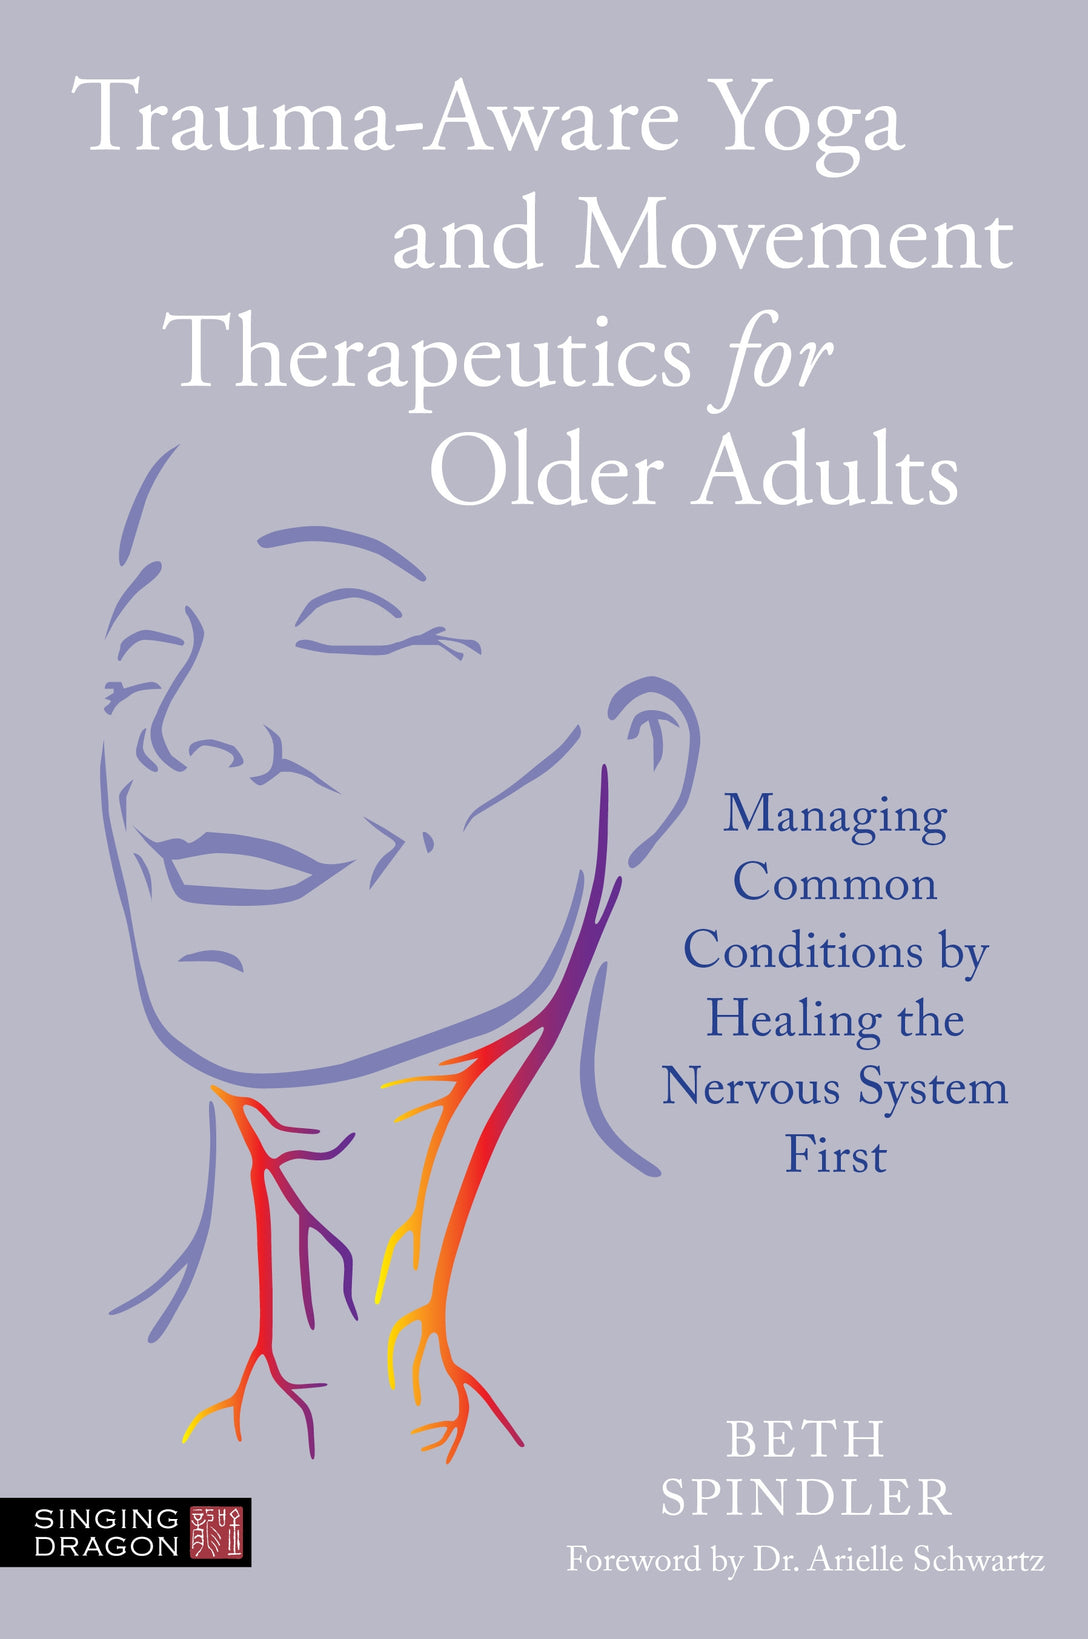 Trauma-Aware Yoga and Movement Therapeutics for Older Adults by Beth Spindler, Arielle Schwartz